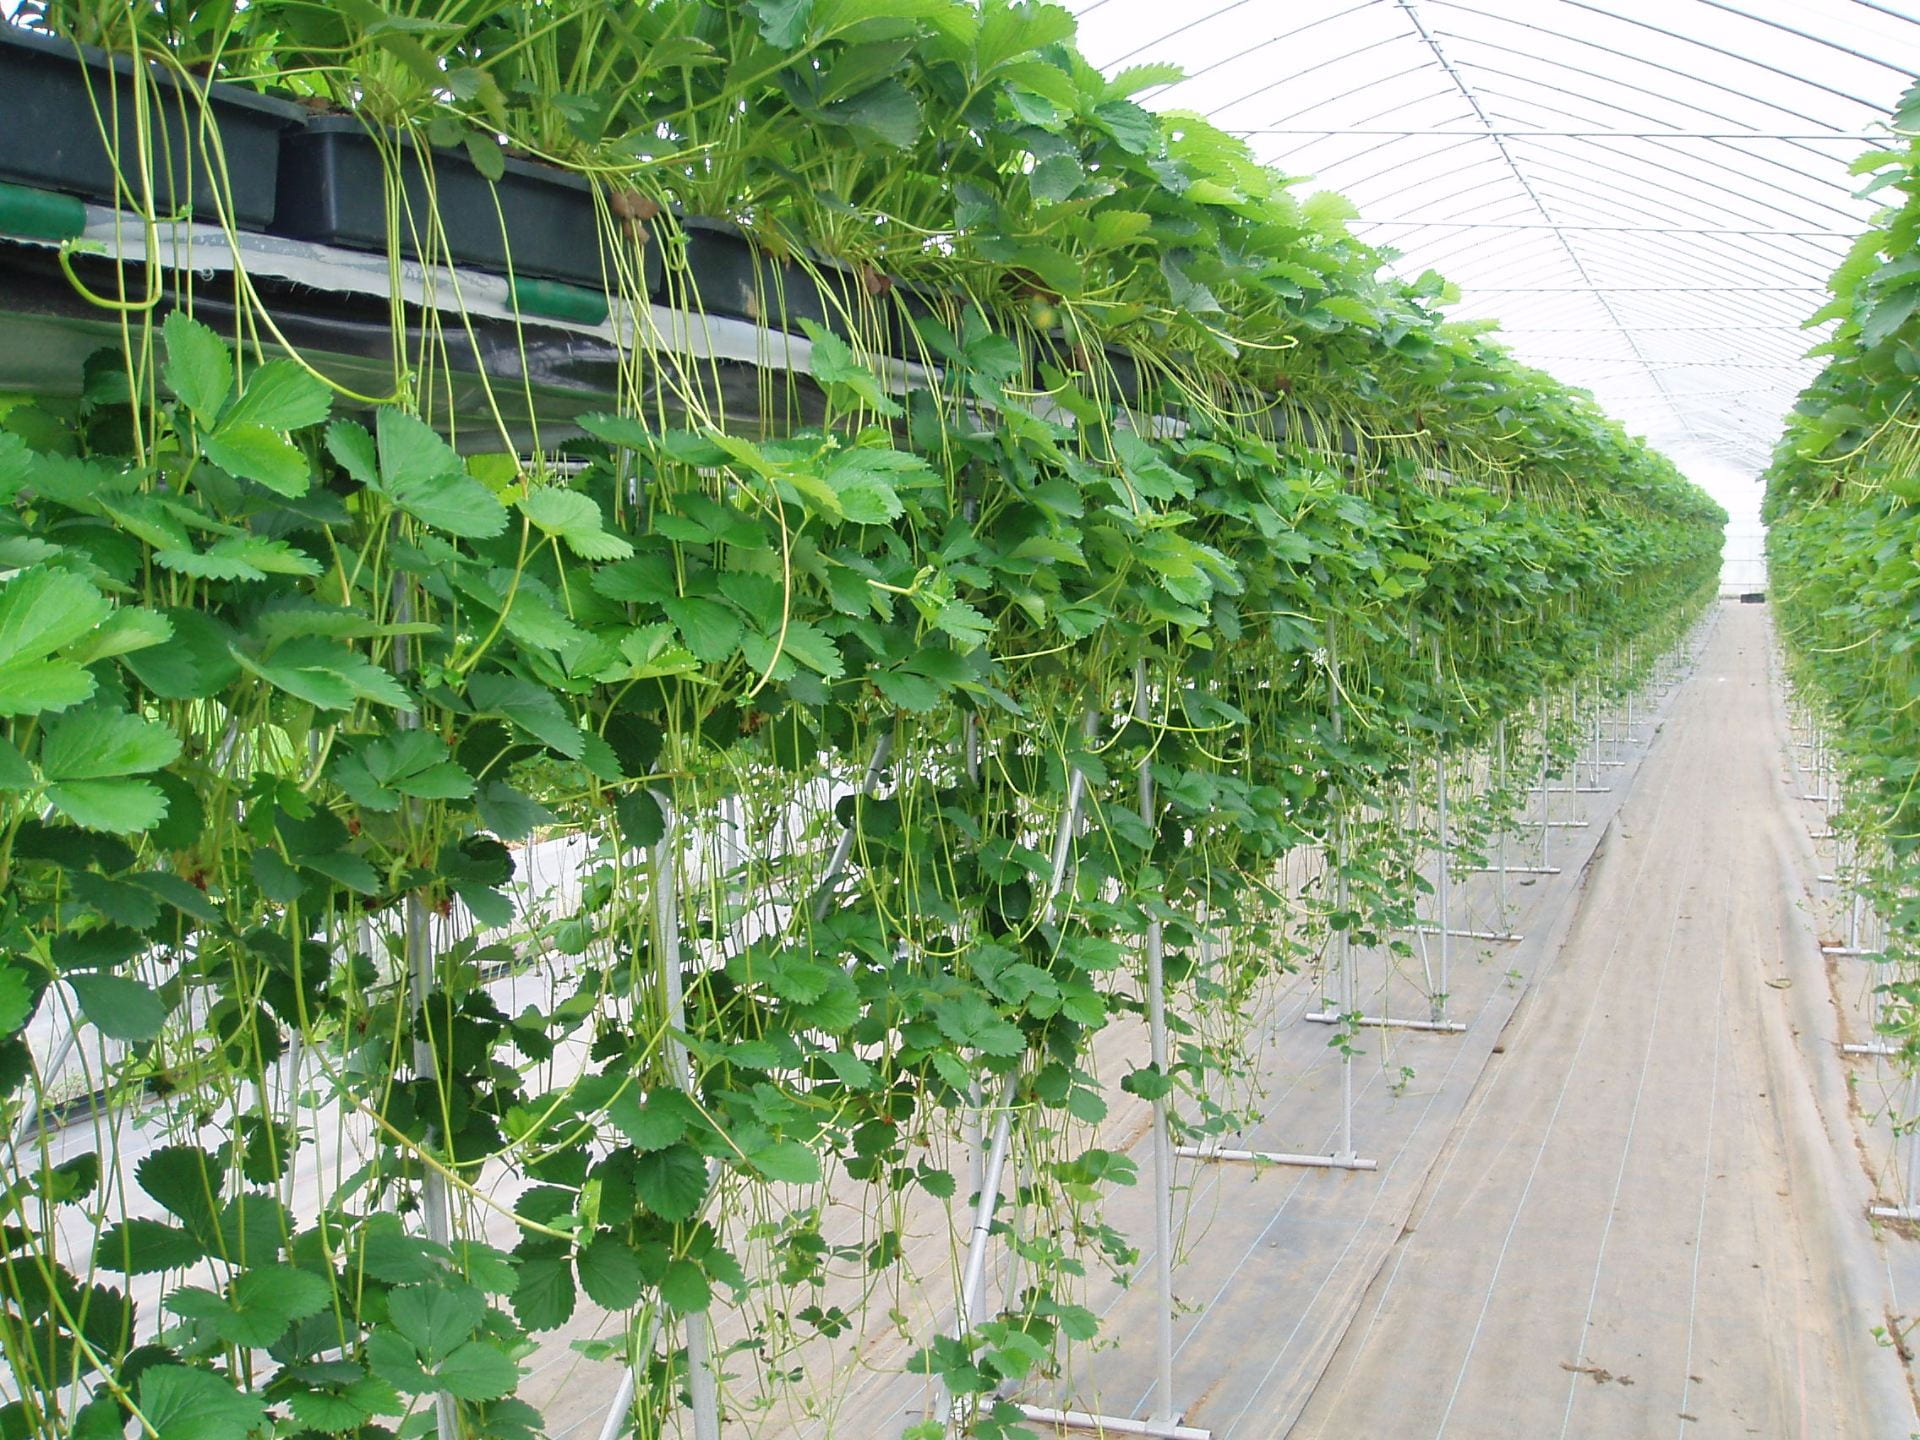 Runner production in a greenhouse in Japan (a photo by Endo Strawberryfields Co.).